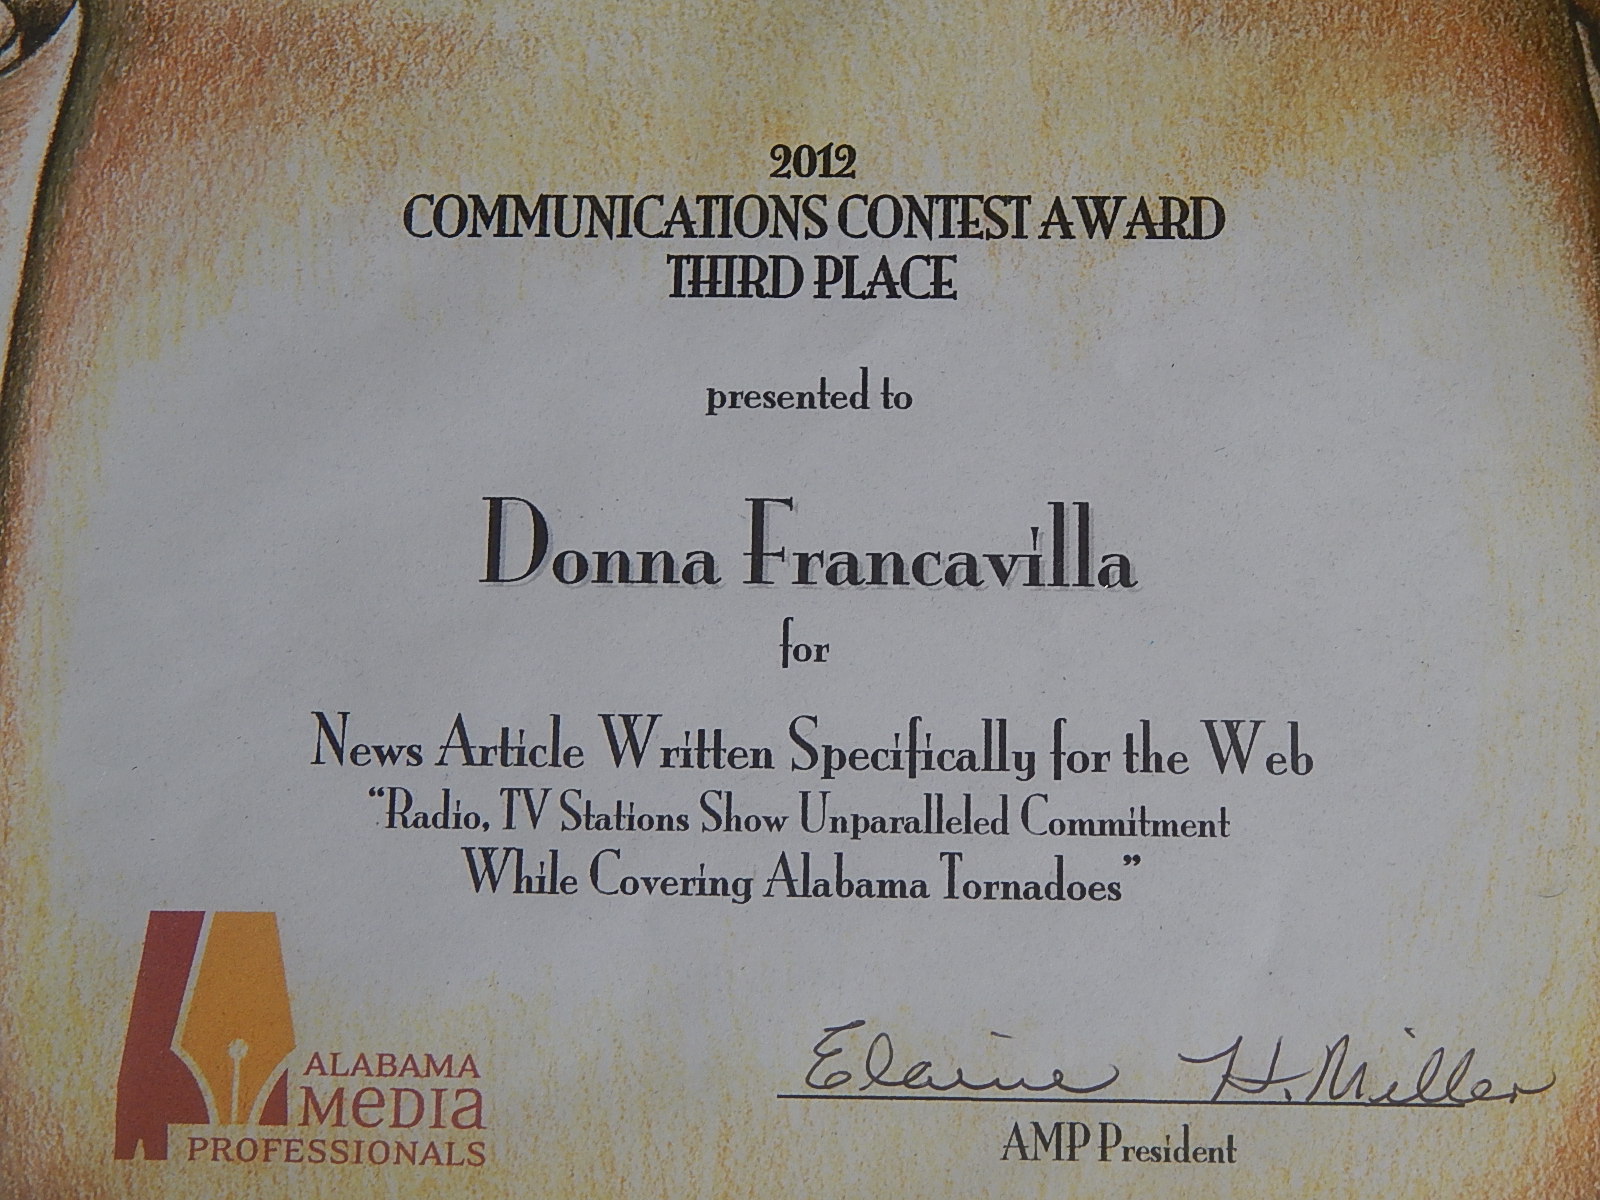 2012 Alabama Media Professionals Communications Contest Award - State Award - Third Place presented to Donna Francavilla for News Article Written Specifically for the Web "Radio, TV Stations Show Unparalleled Commitment While Covering Alabama Tornadoes"